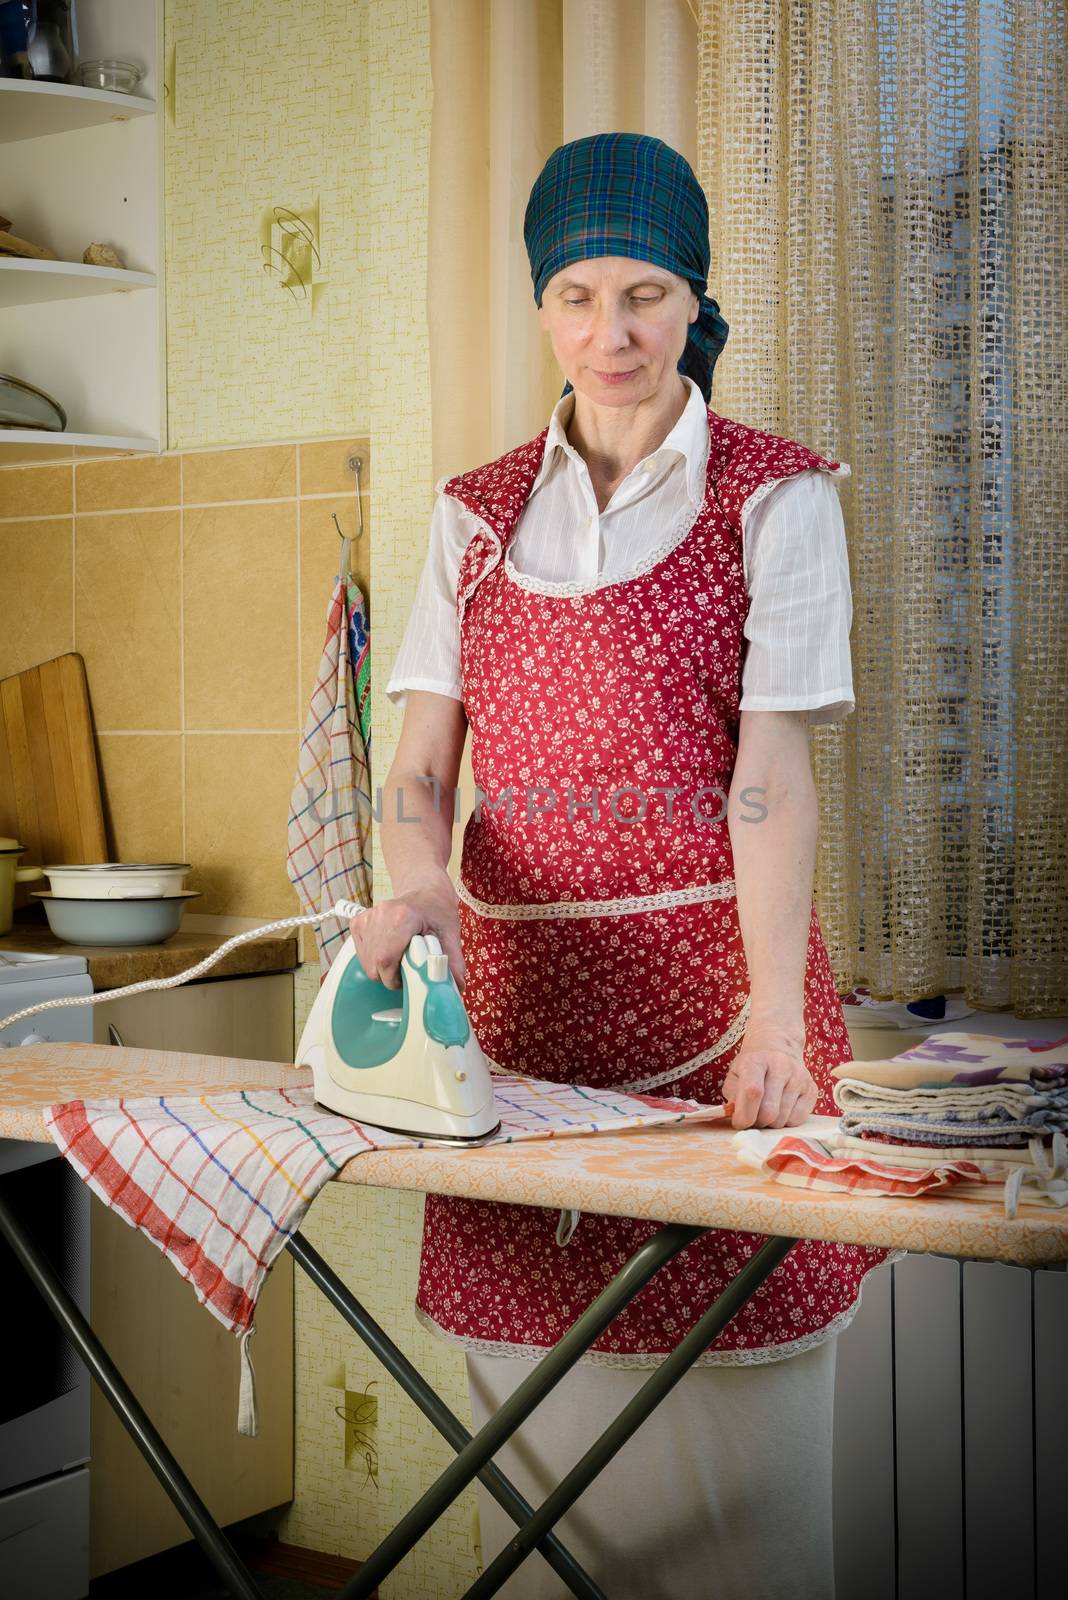 An adult woman, a housewife or a maid, with a green scarf on the head and wearing a red apron, is standing behind the ironing board. She irons some tea towels in the kitchen